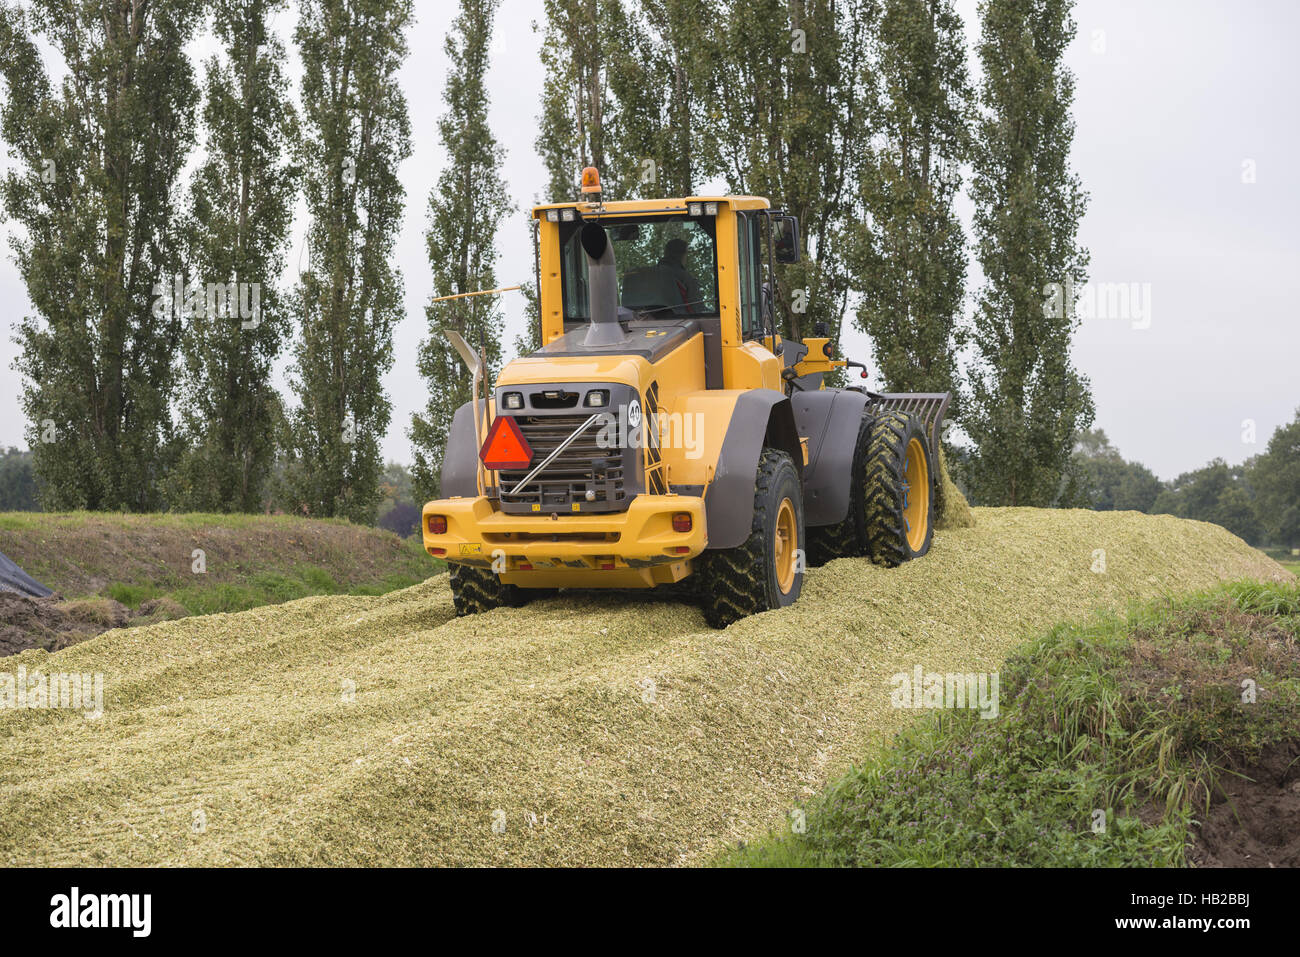 Agriculture shredded corn silage Stock Photo